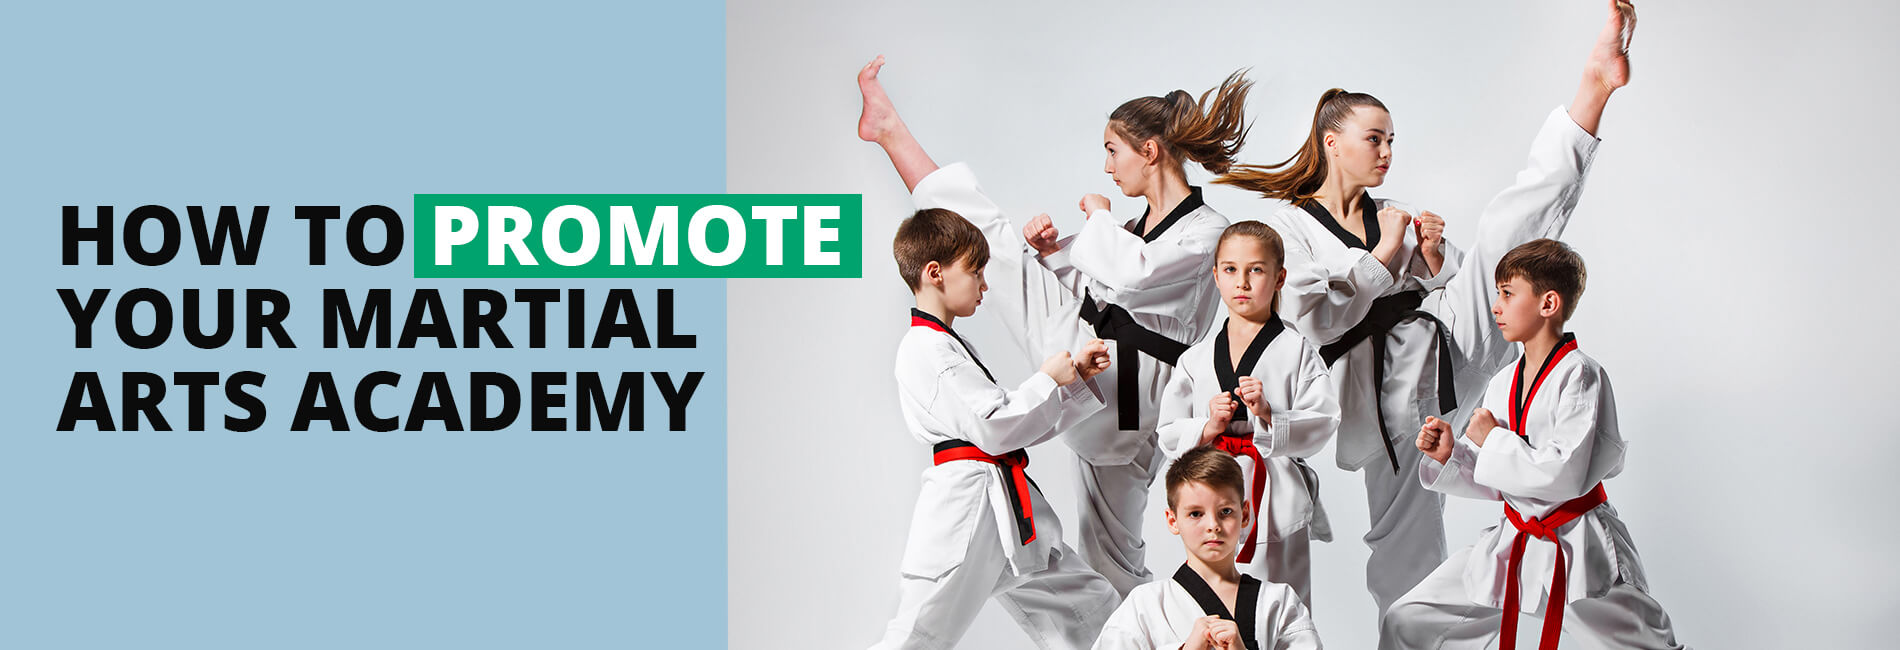 How to Promote Your Martial Arts Academy | Easy Gym Software